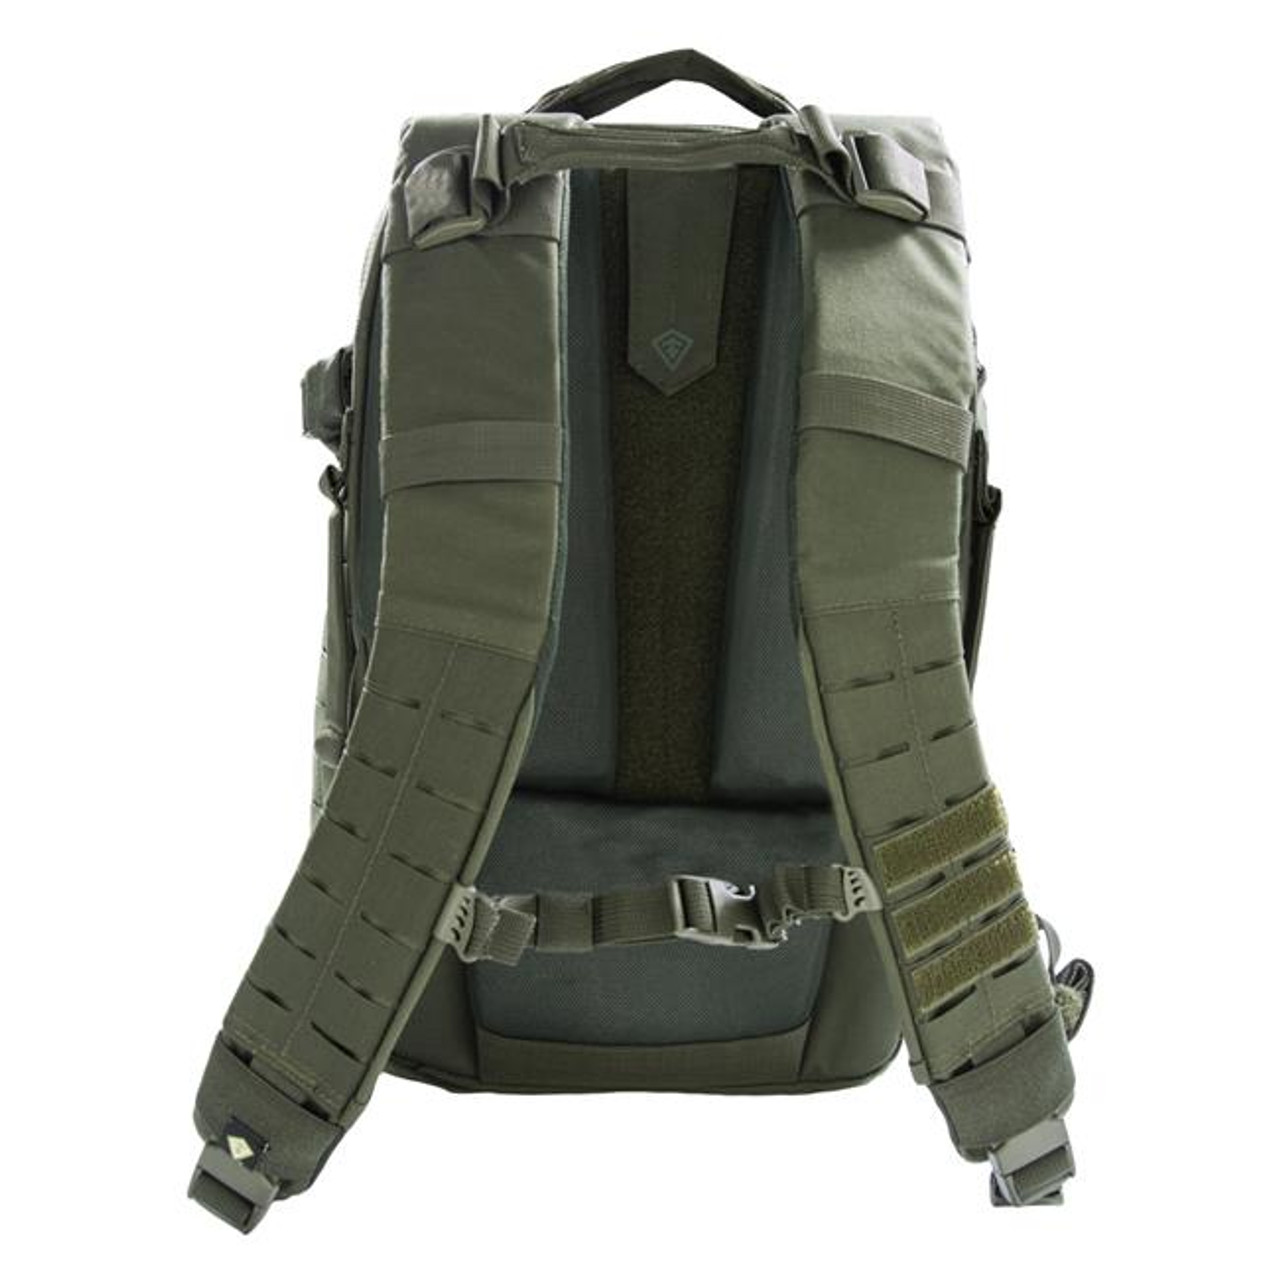 Olive Drab Tactix 0.5 Backpack by First Tactical | Military Luggage